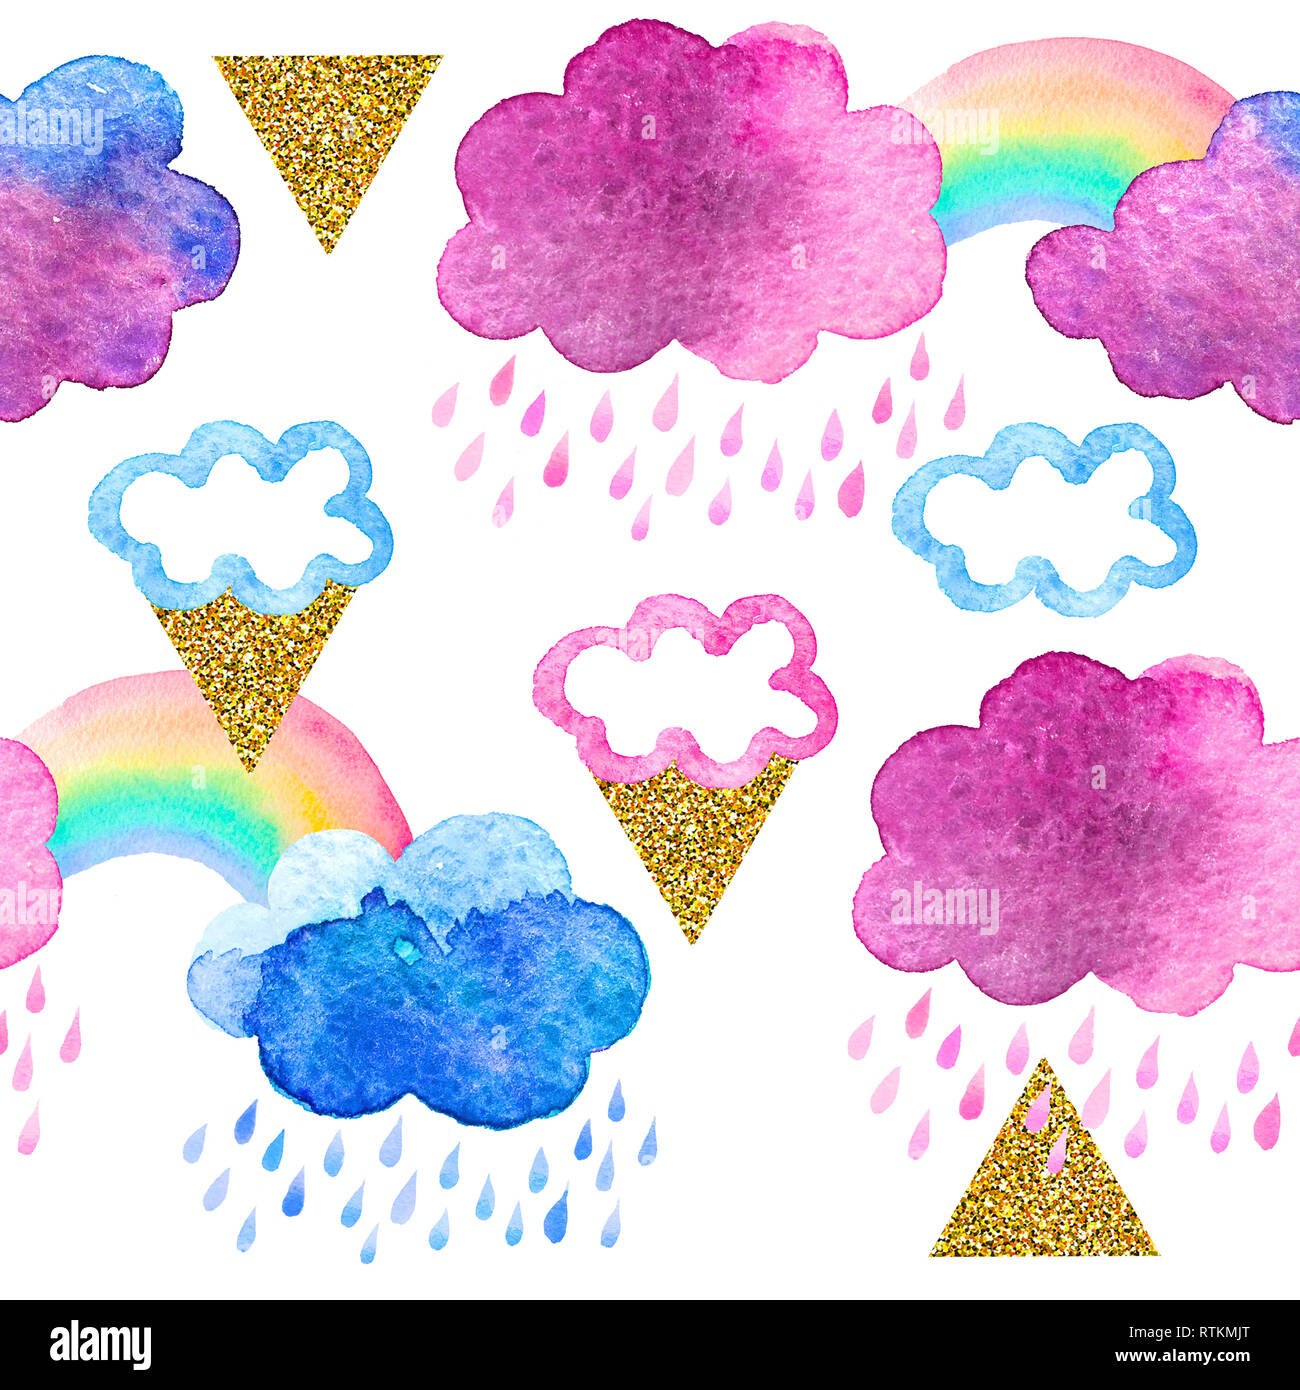 Cute watercolor clouds with rainbow and gold glitter elements. Seamless pattern with watercolor objects isolated on white background for your design:  Stock Photo